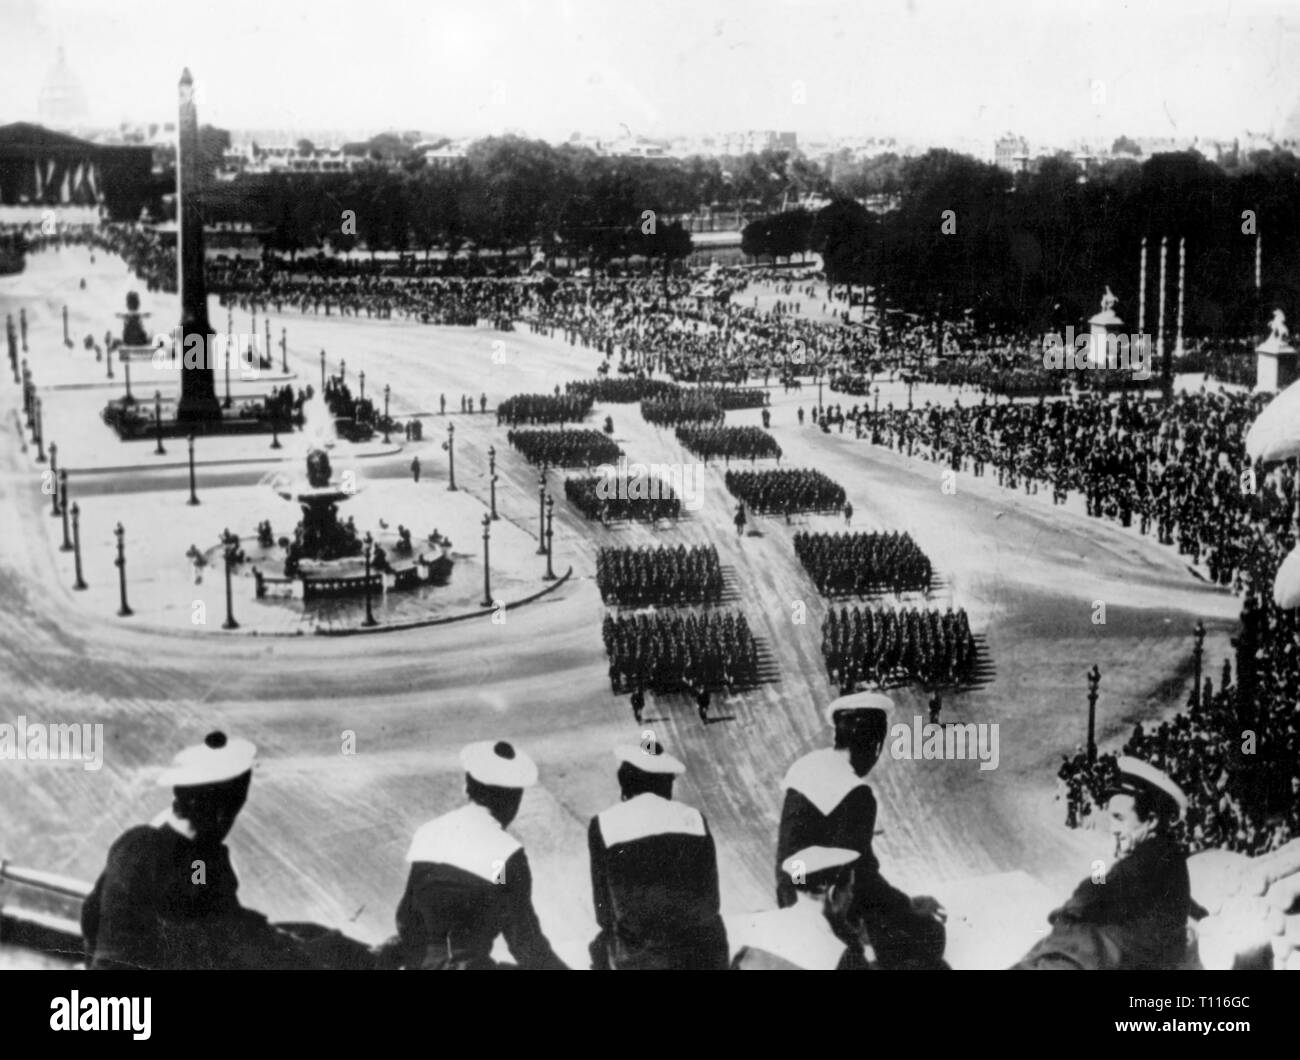 Second World War / WWII, France, occupation period, military parade on the national holiday, Place de la Concorde, Paris, 14.7.1940, Additional-Rights-Clearance-Info-Not-Available Stock Photo